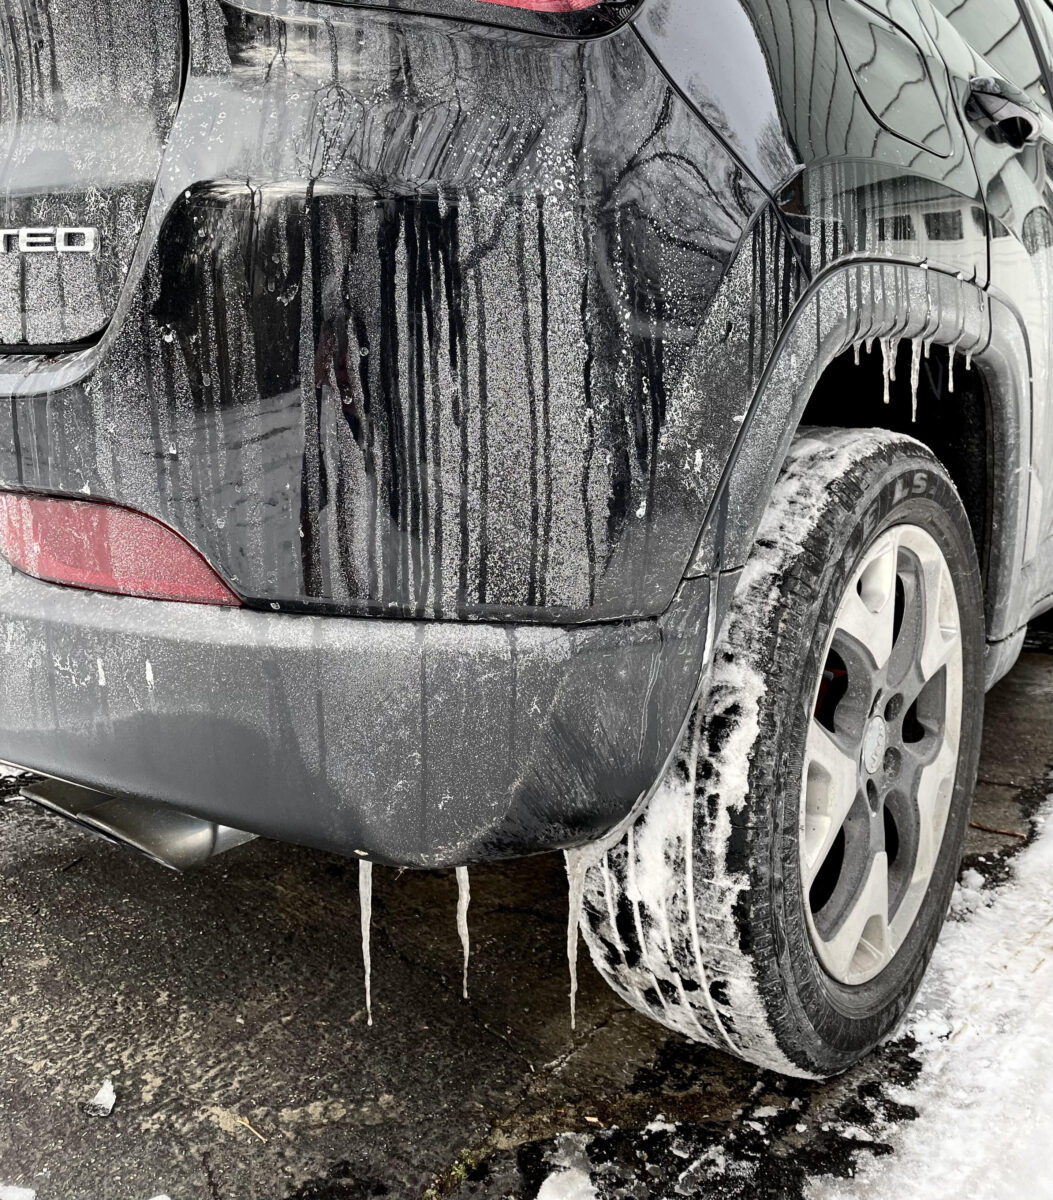 Washing Your Car In The Winter